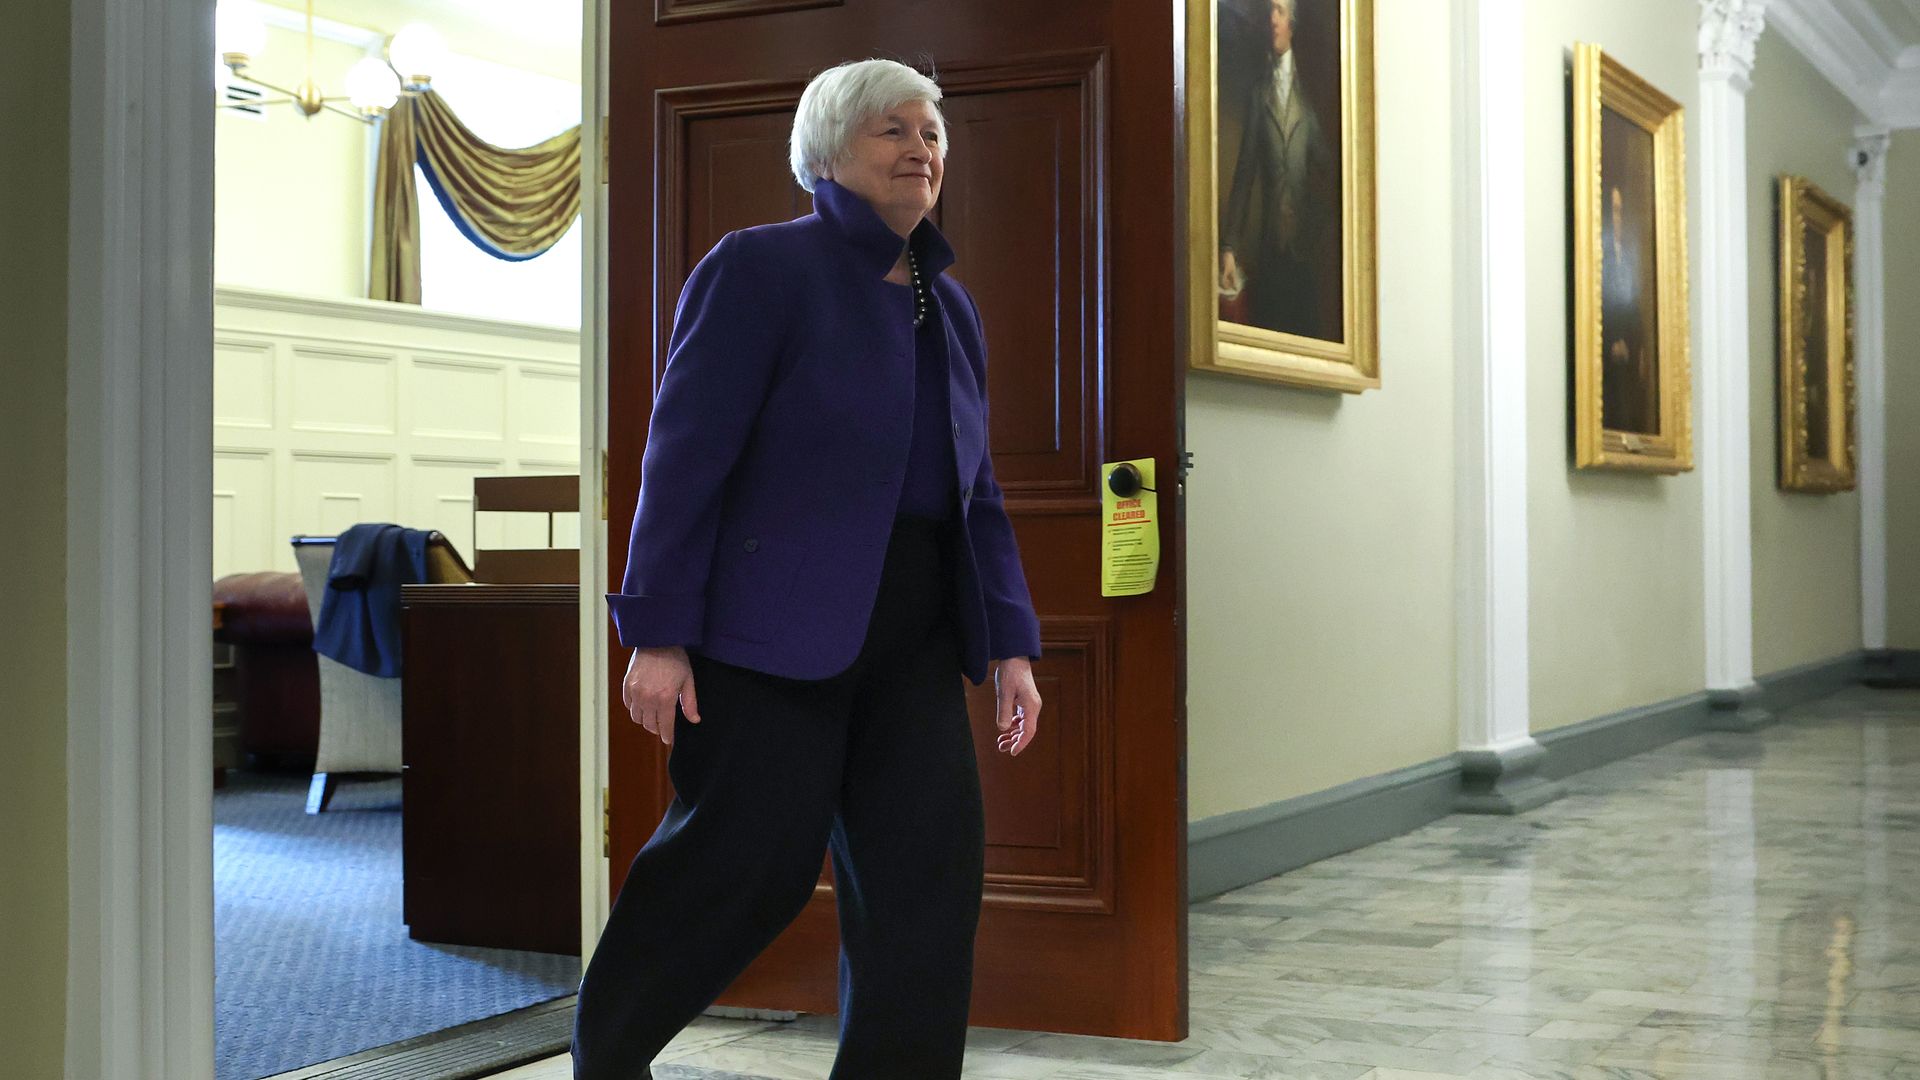 U.S. Treasury Secretary Janet Yellen leaving her office at the Department of the Treasury in Washington, D.C., on Jan. 10. Photo: Kevin Dietsch/Getty Images